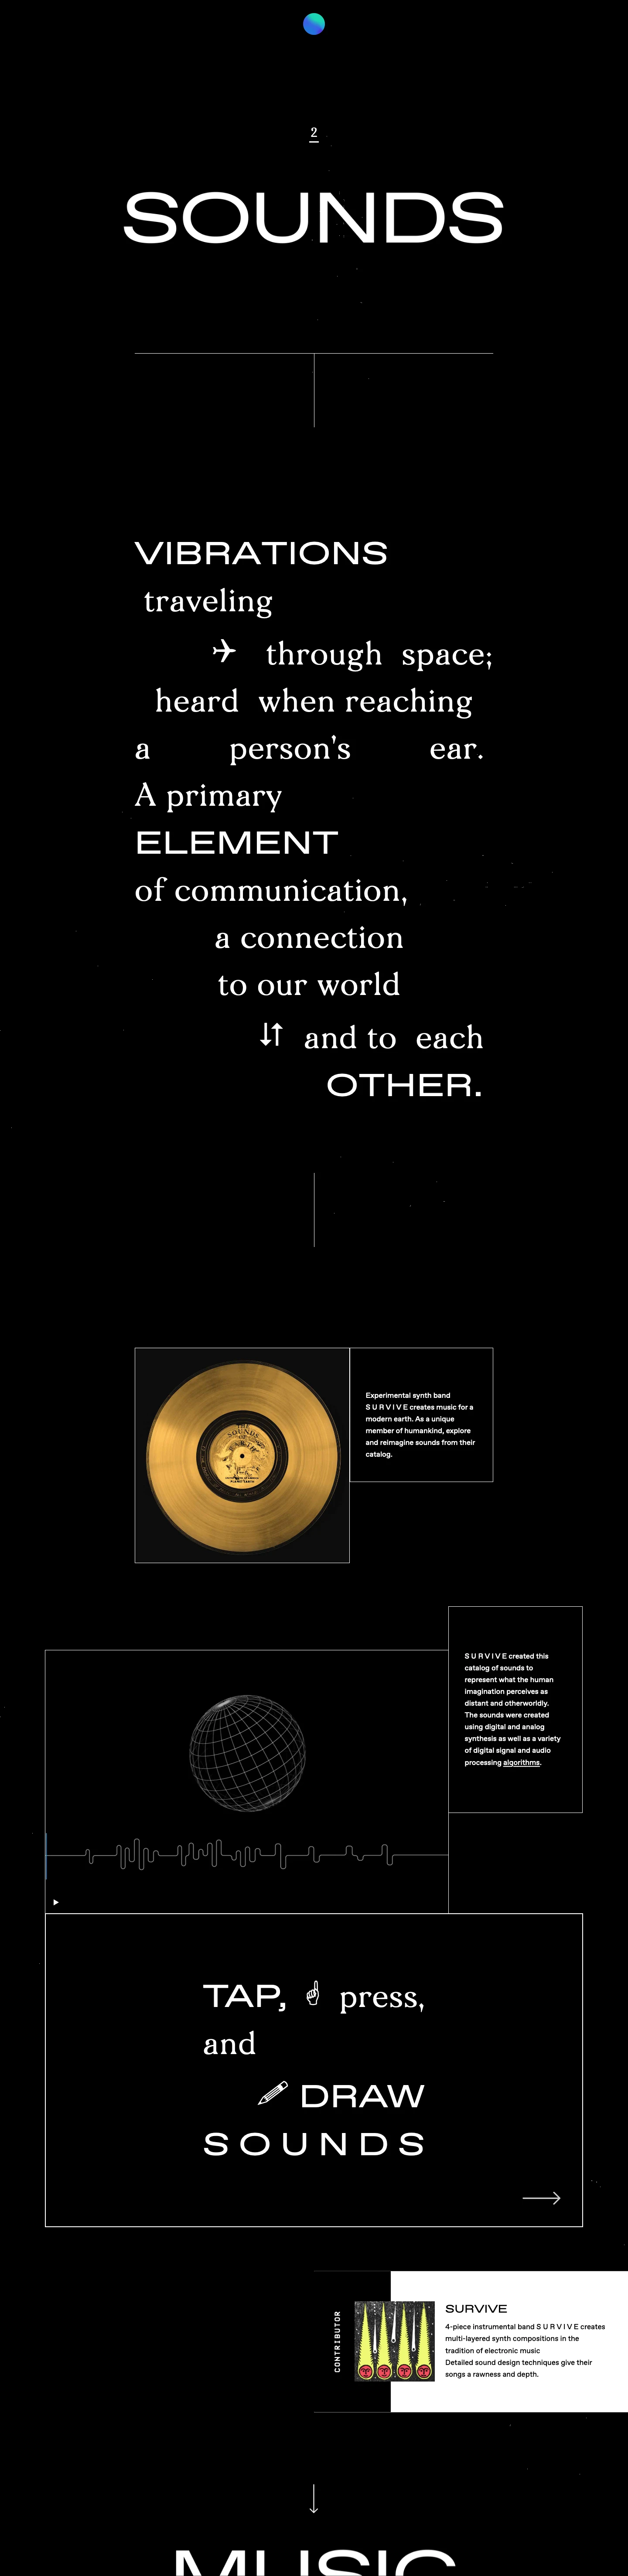 A Message from Earth Landing Page Example: A Message from Earth is a celebration of the Voyager Golden Record in its 40th year, featuring contributions from 40+ people influenced by the original.